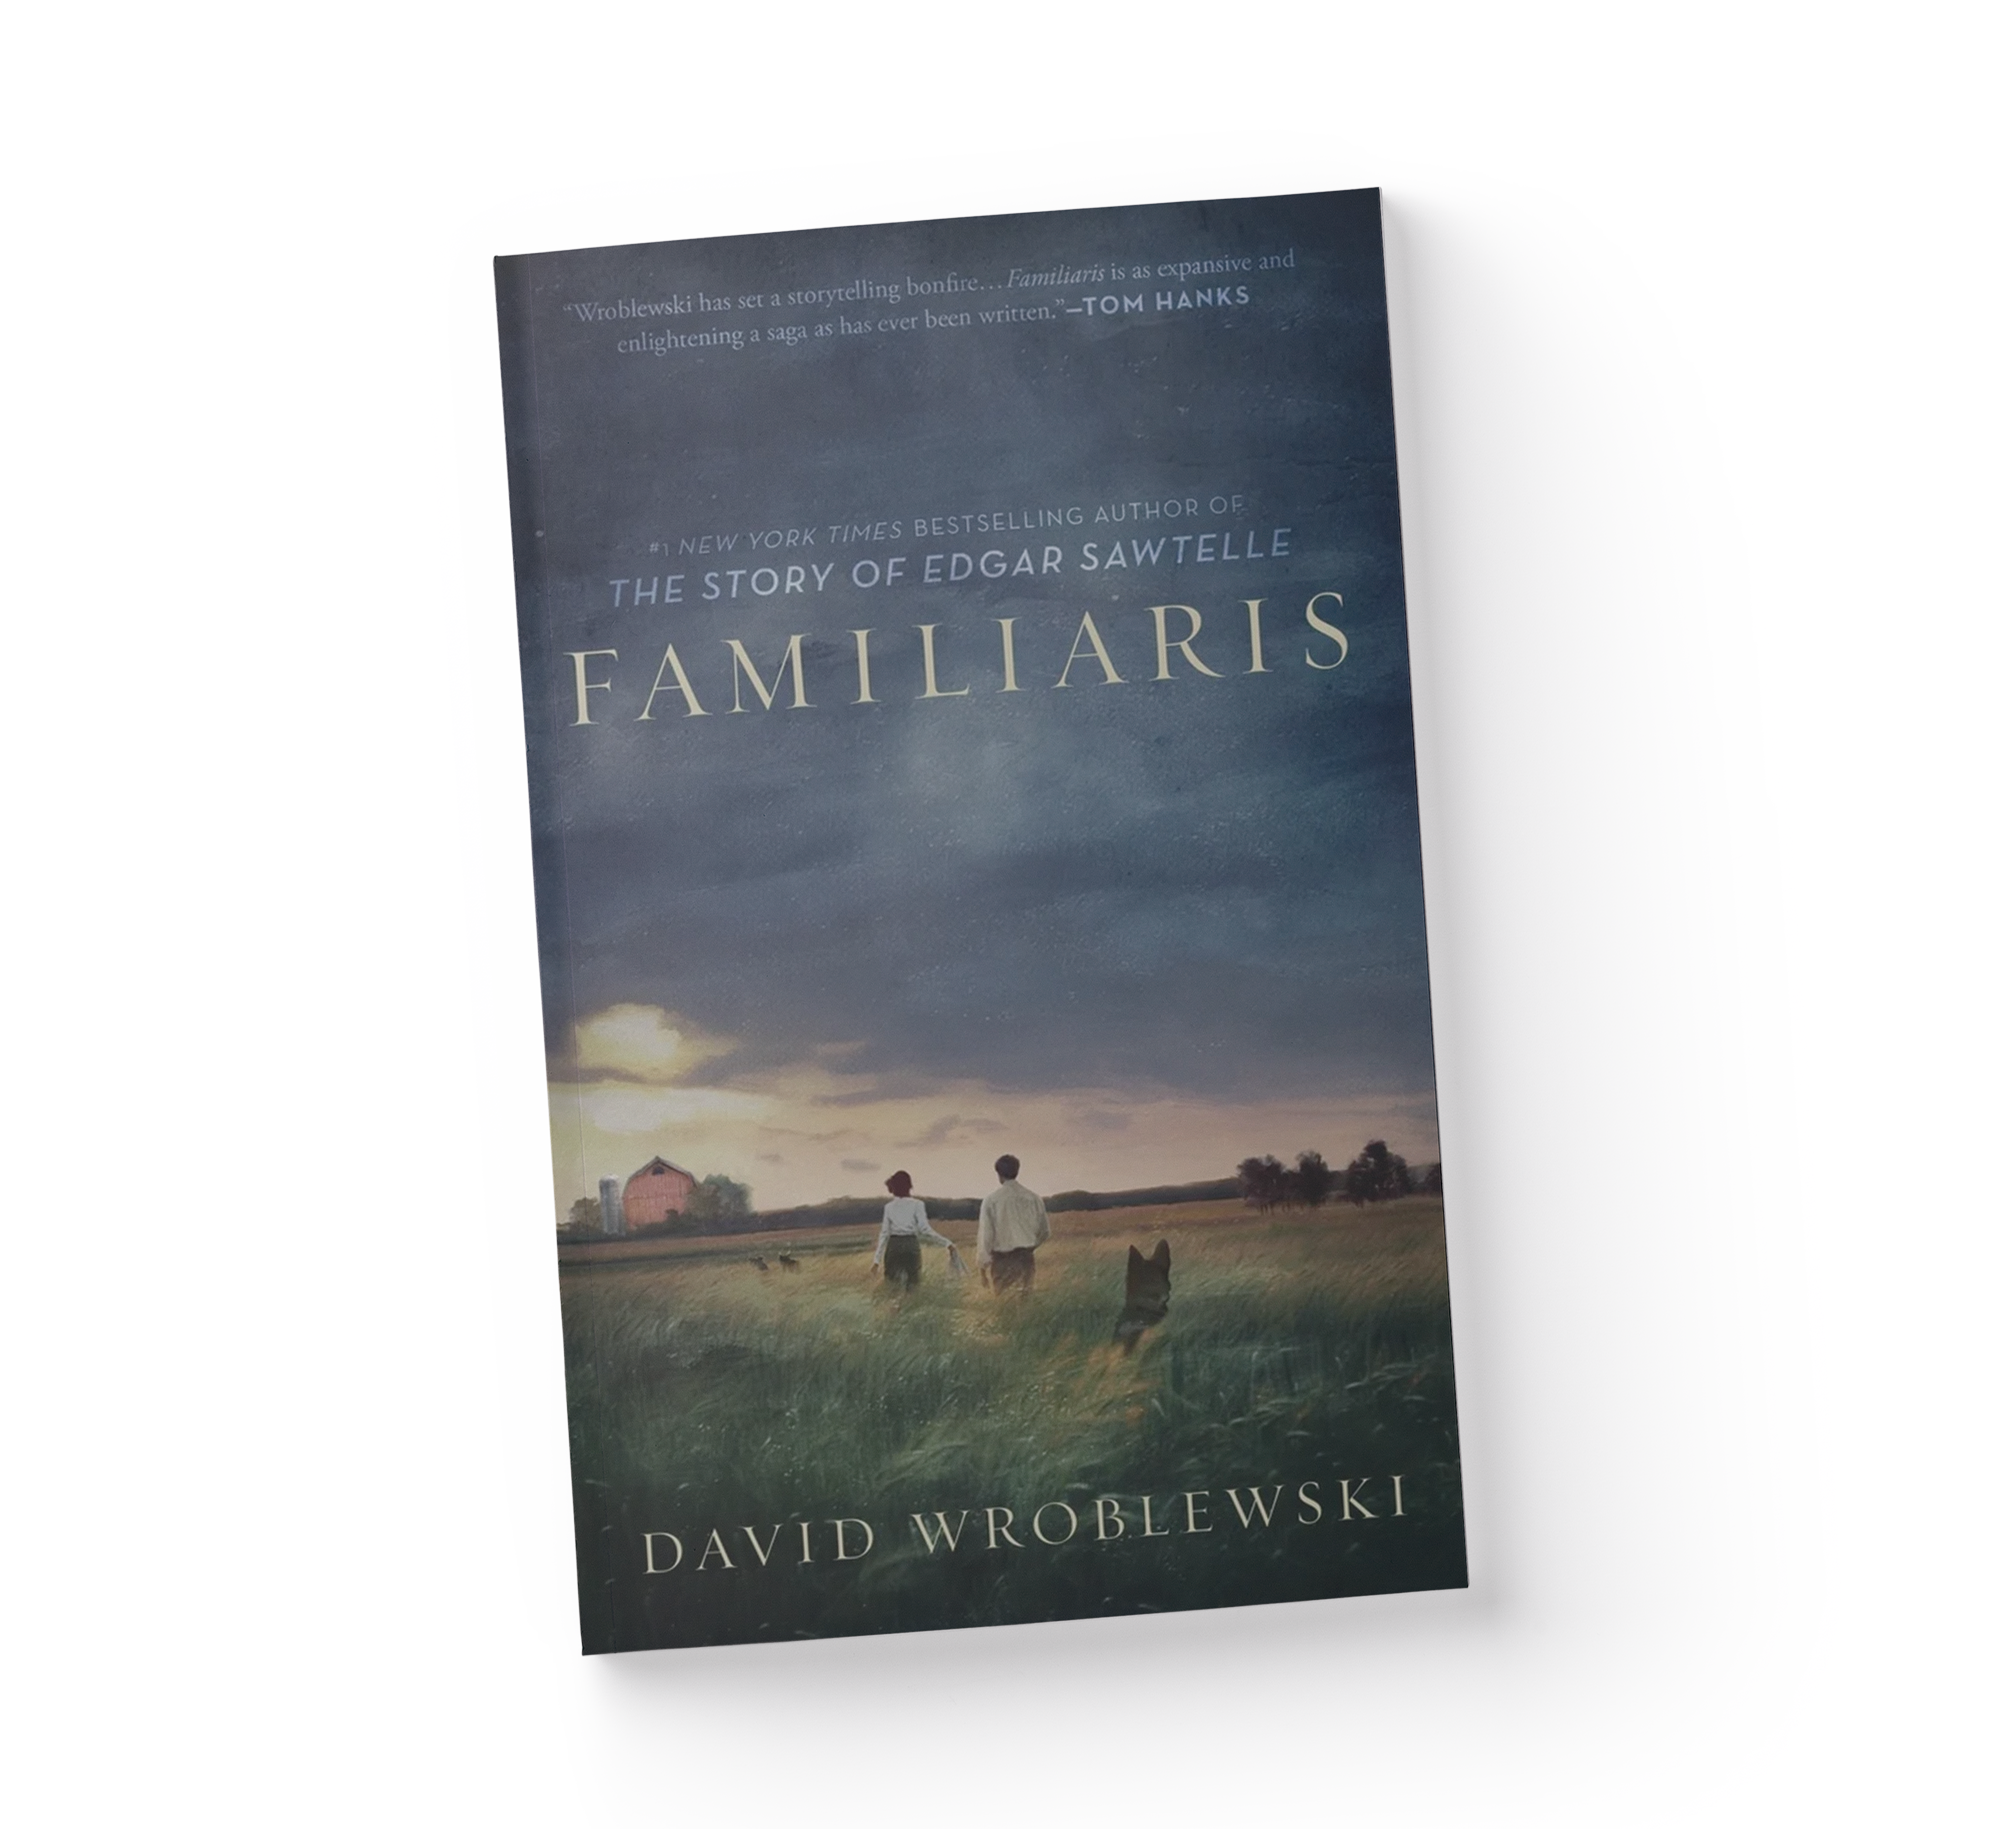 a book cover with two people walking in a field